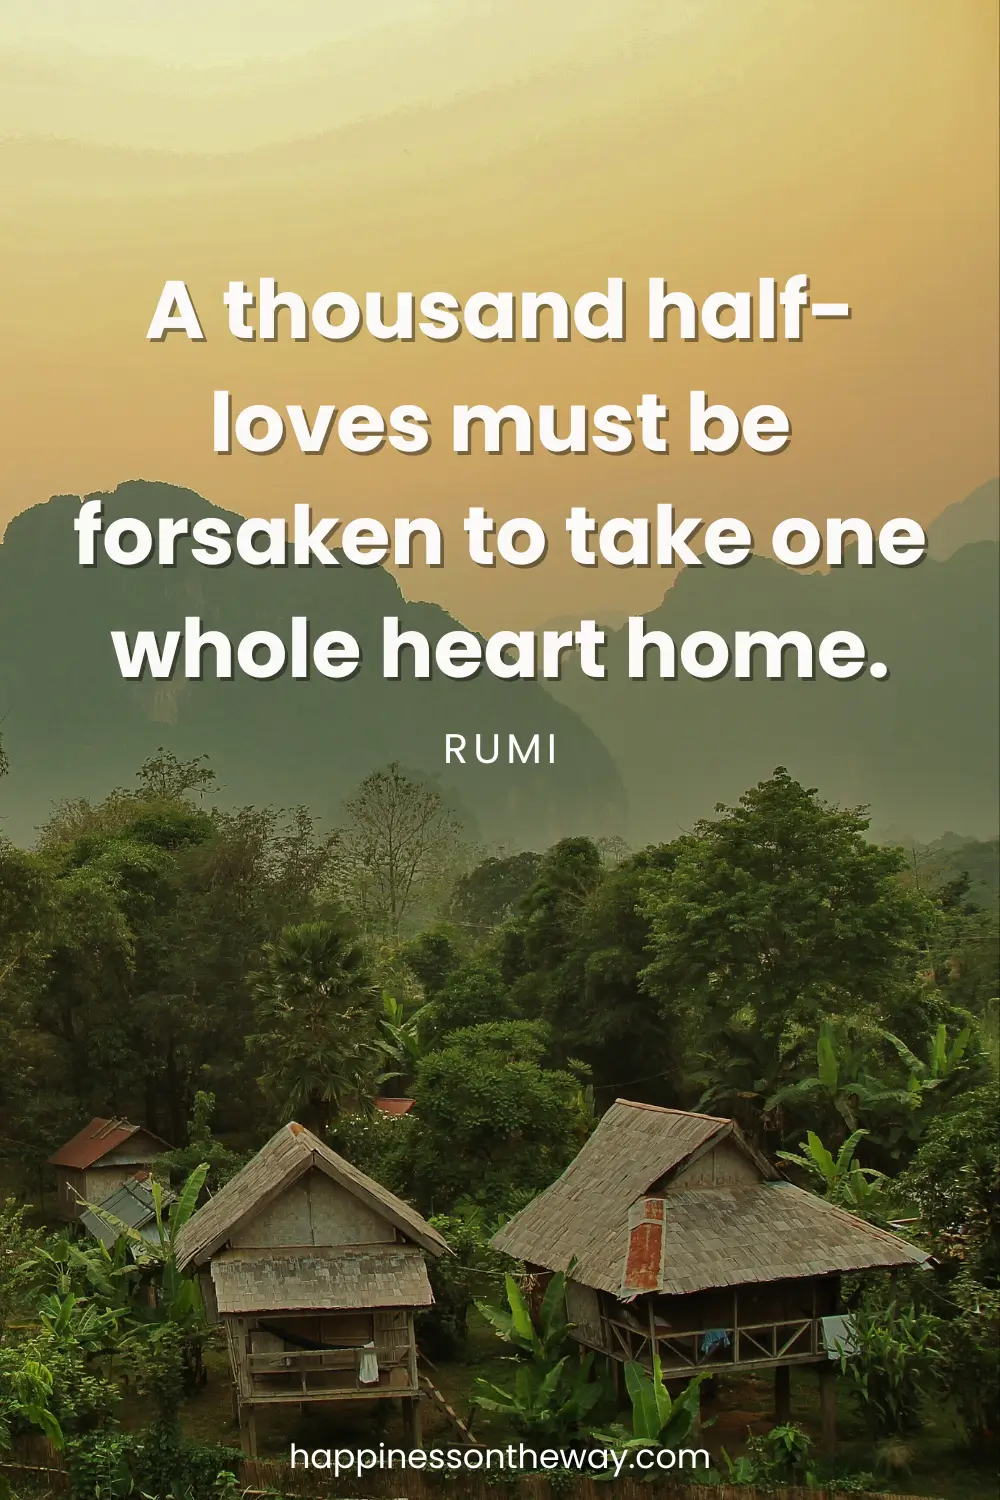 Scenic view of a tropical village with traditional huts surrounded by lush greenery and mountains in the background, with the Rumi quote 'A thousand half-loves must be forsaken to take one whole heart home.' and the website credit happinessontheway.com at the bottom."